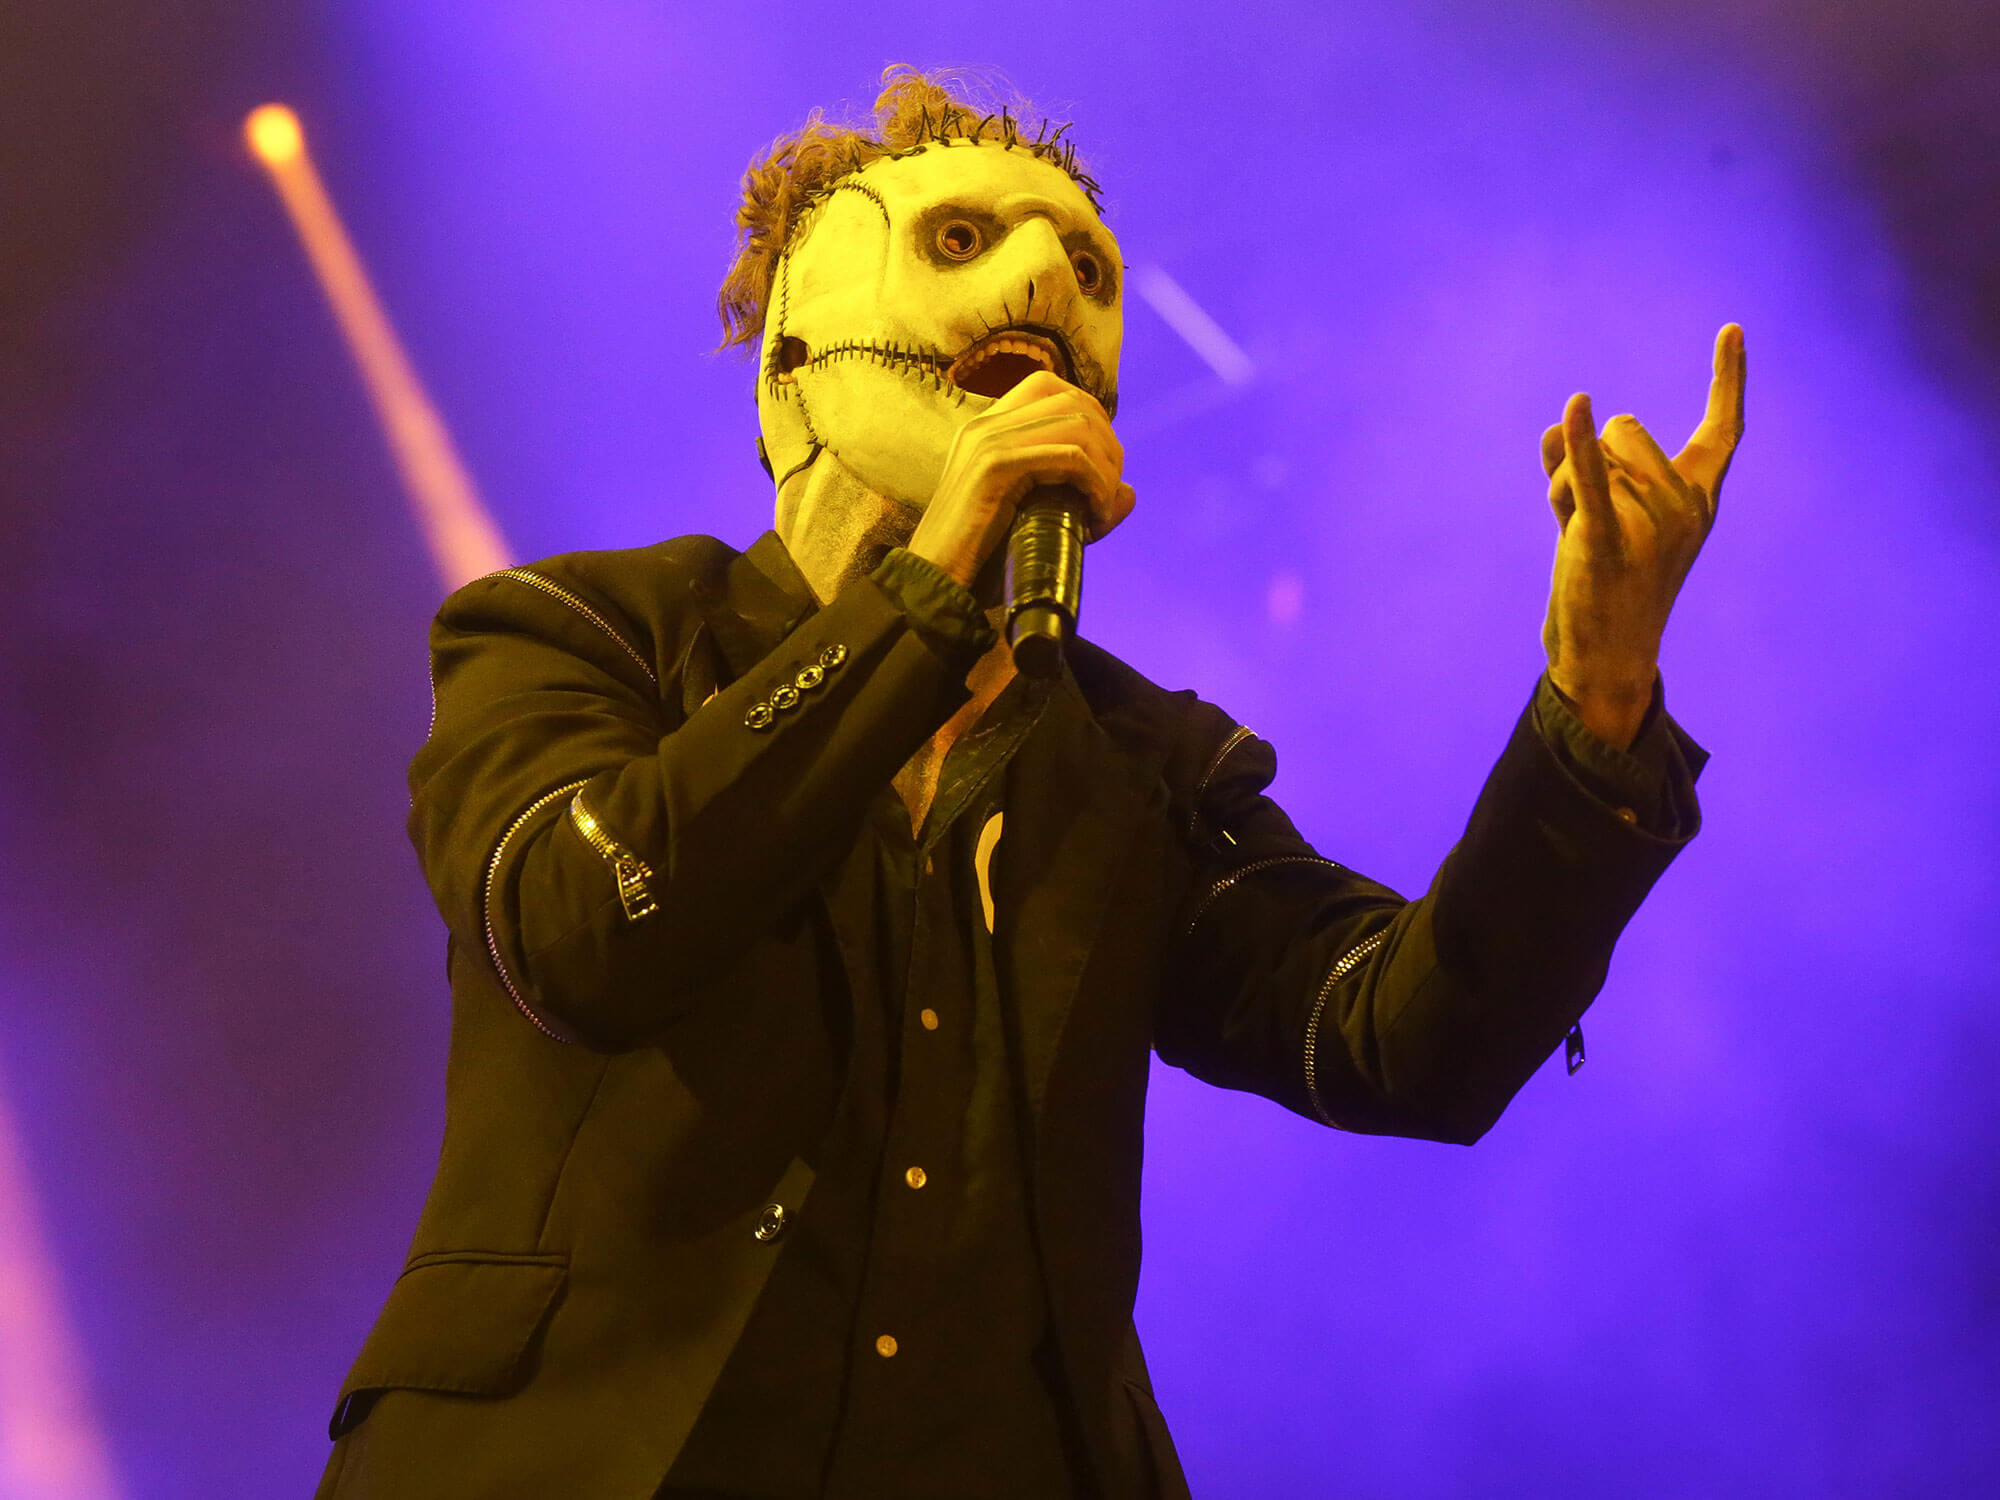 Corey Taylor performing with Slipknot